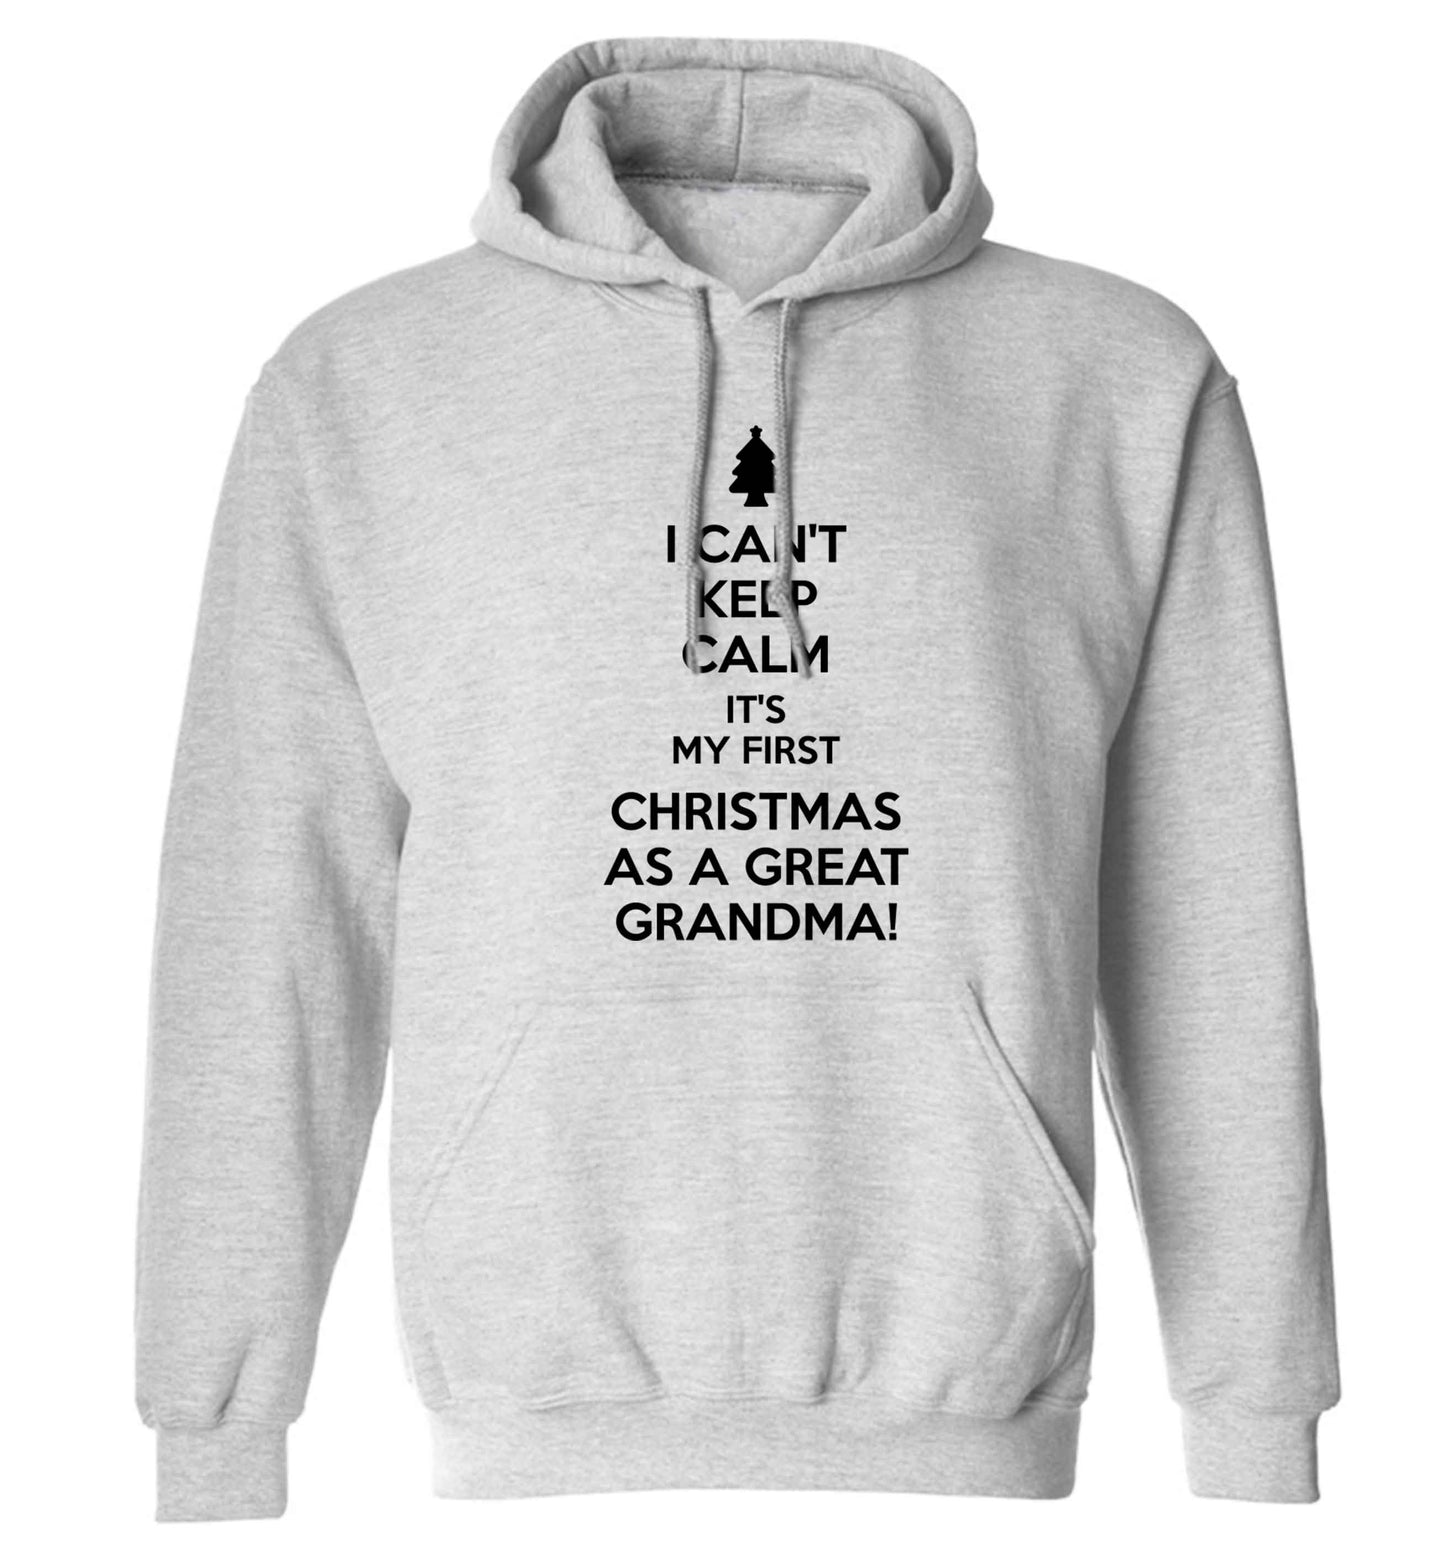 I can't keep calm it's my first Christmas as a great grandma! adults unisex grey hoodie 2XL